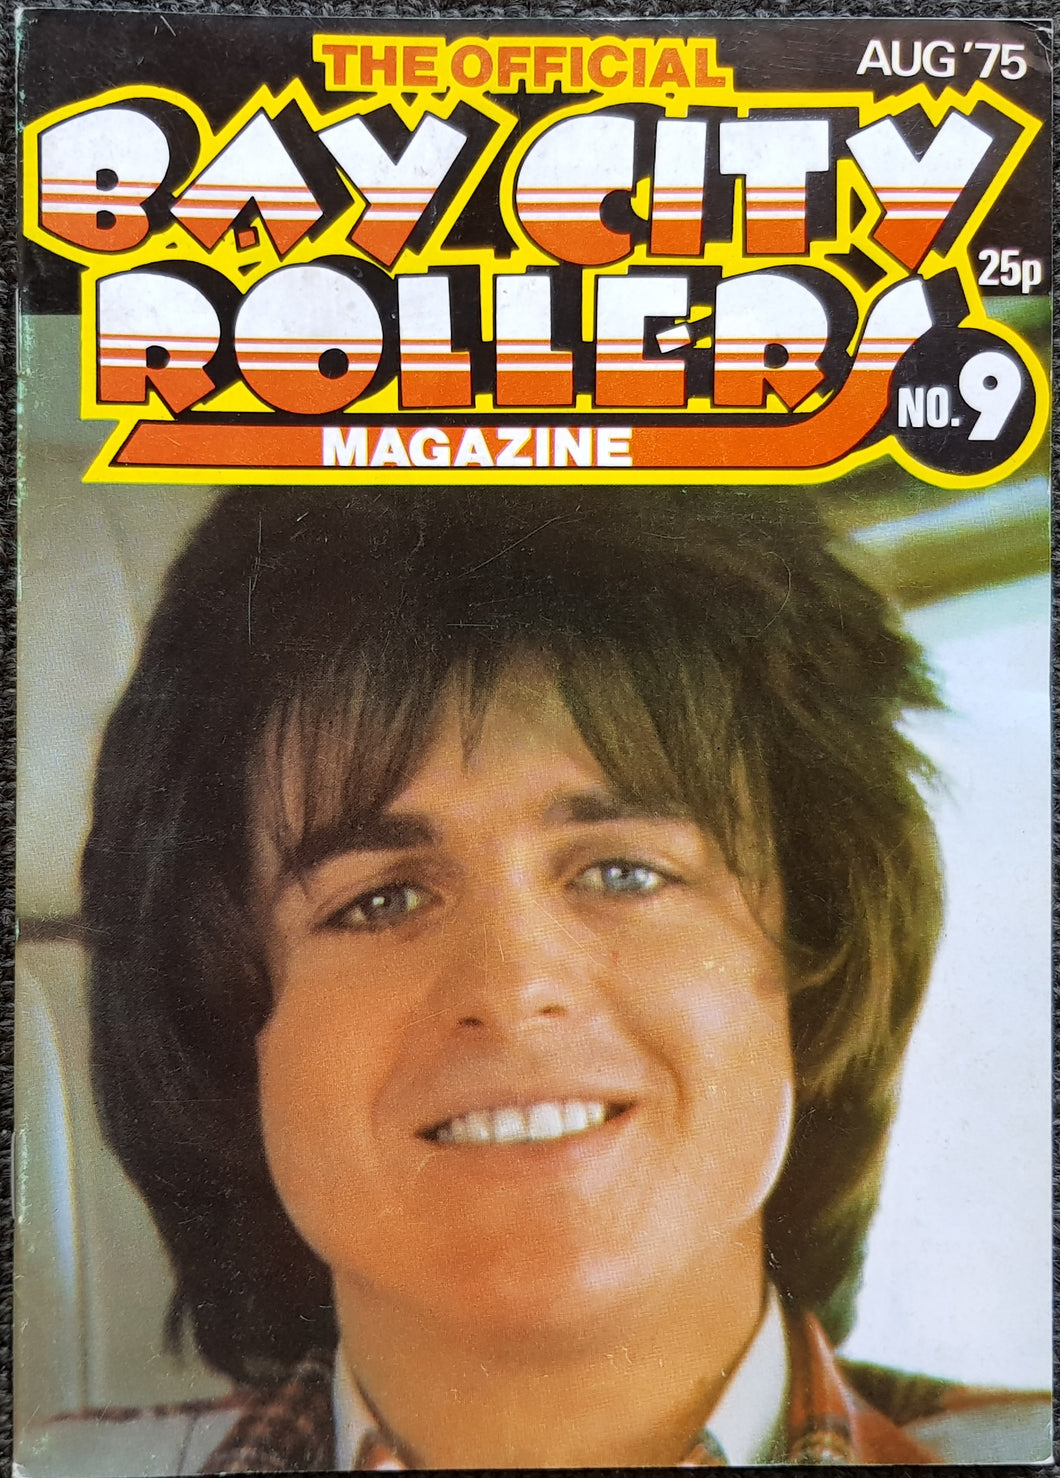 Bay City Rollers - The Official Bay City Rollers Magazine No.9